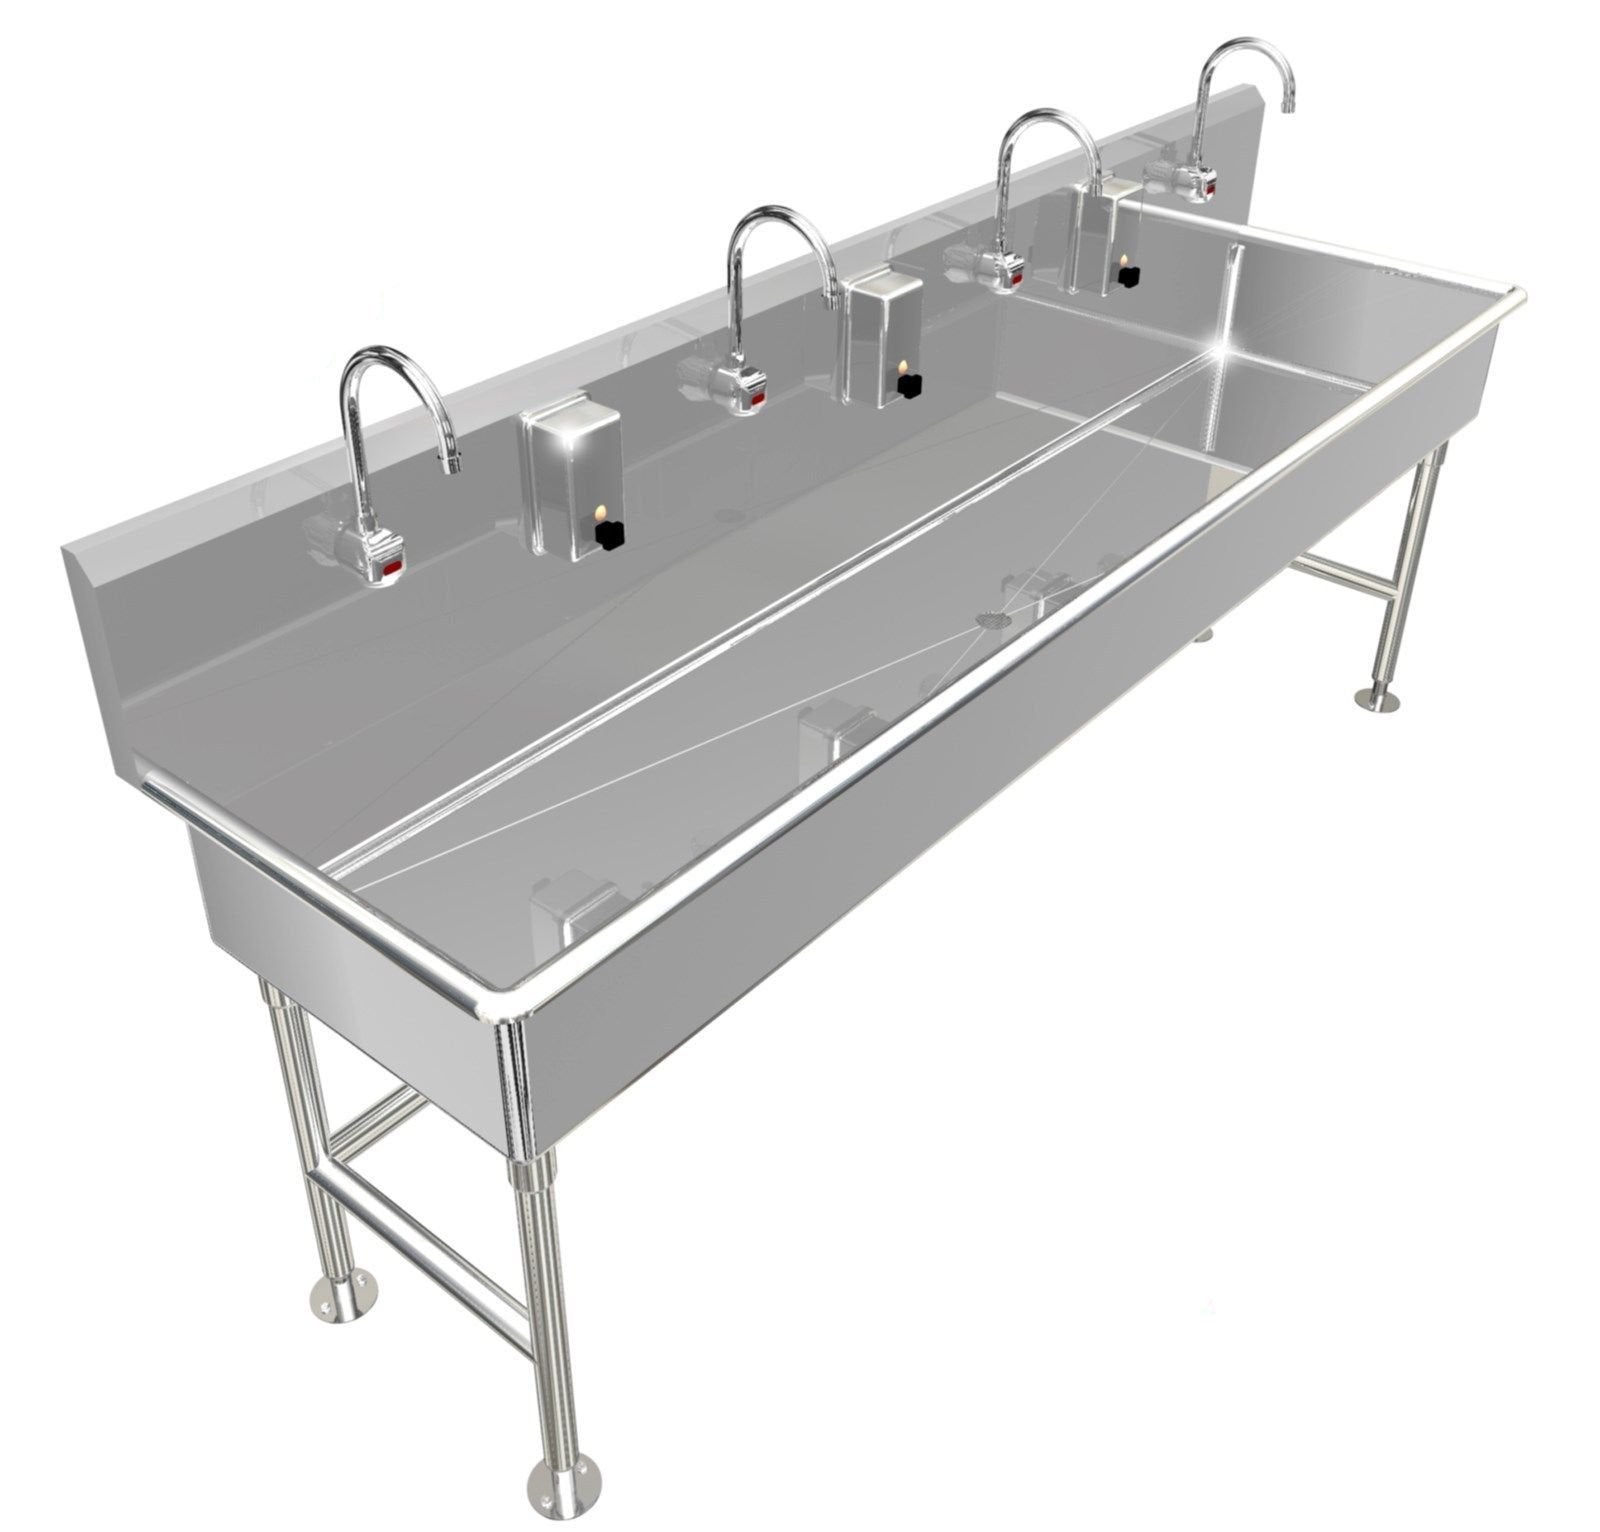 WASH UP SINK BIG TUB 4 STATION 96" ELECTRONIC FAUCET FREE STANDING MADE IN USA - Best Sheet Metal, Inc. 